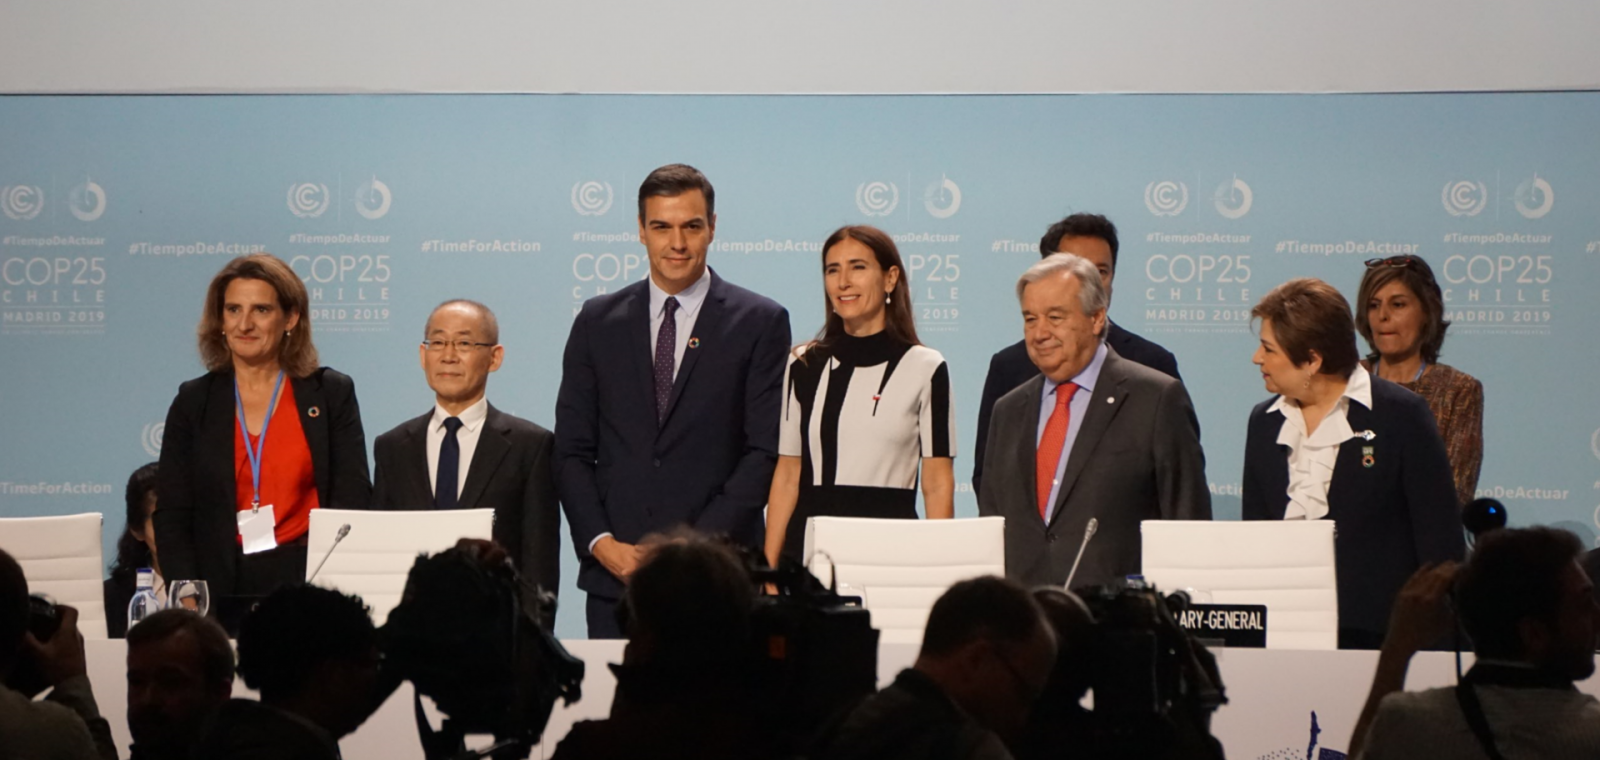 COP25 Has Begun 25th United Nations Climate Change Conference  2-13 December 2019, Madrid Spain